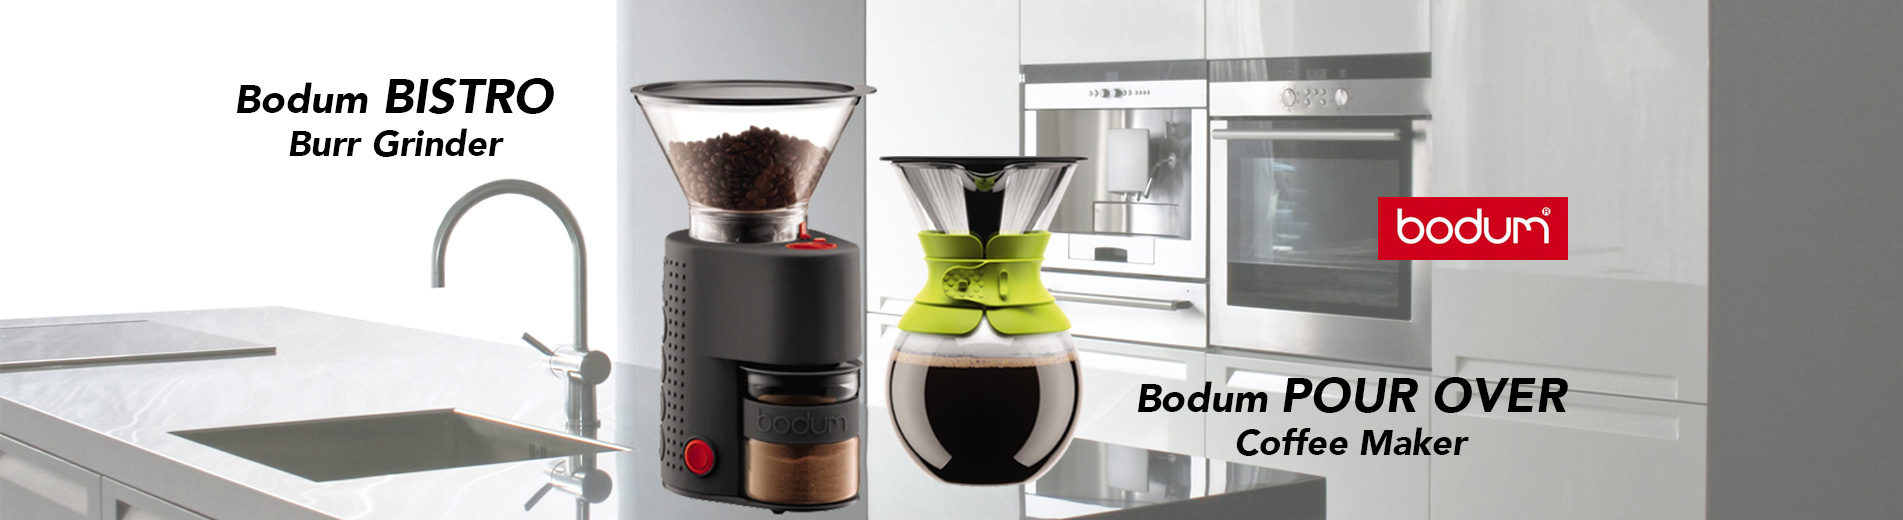 Bodum Bistro Grinder and Pour Over